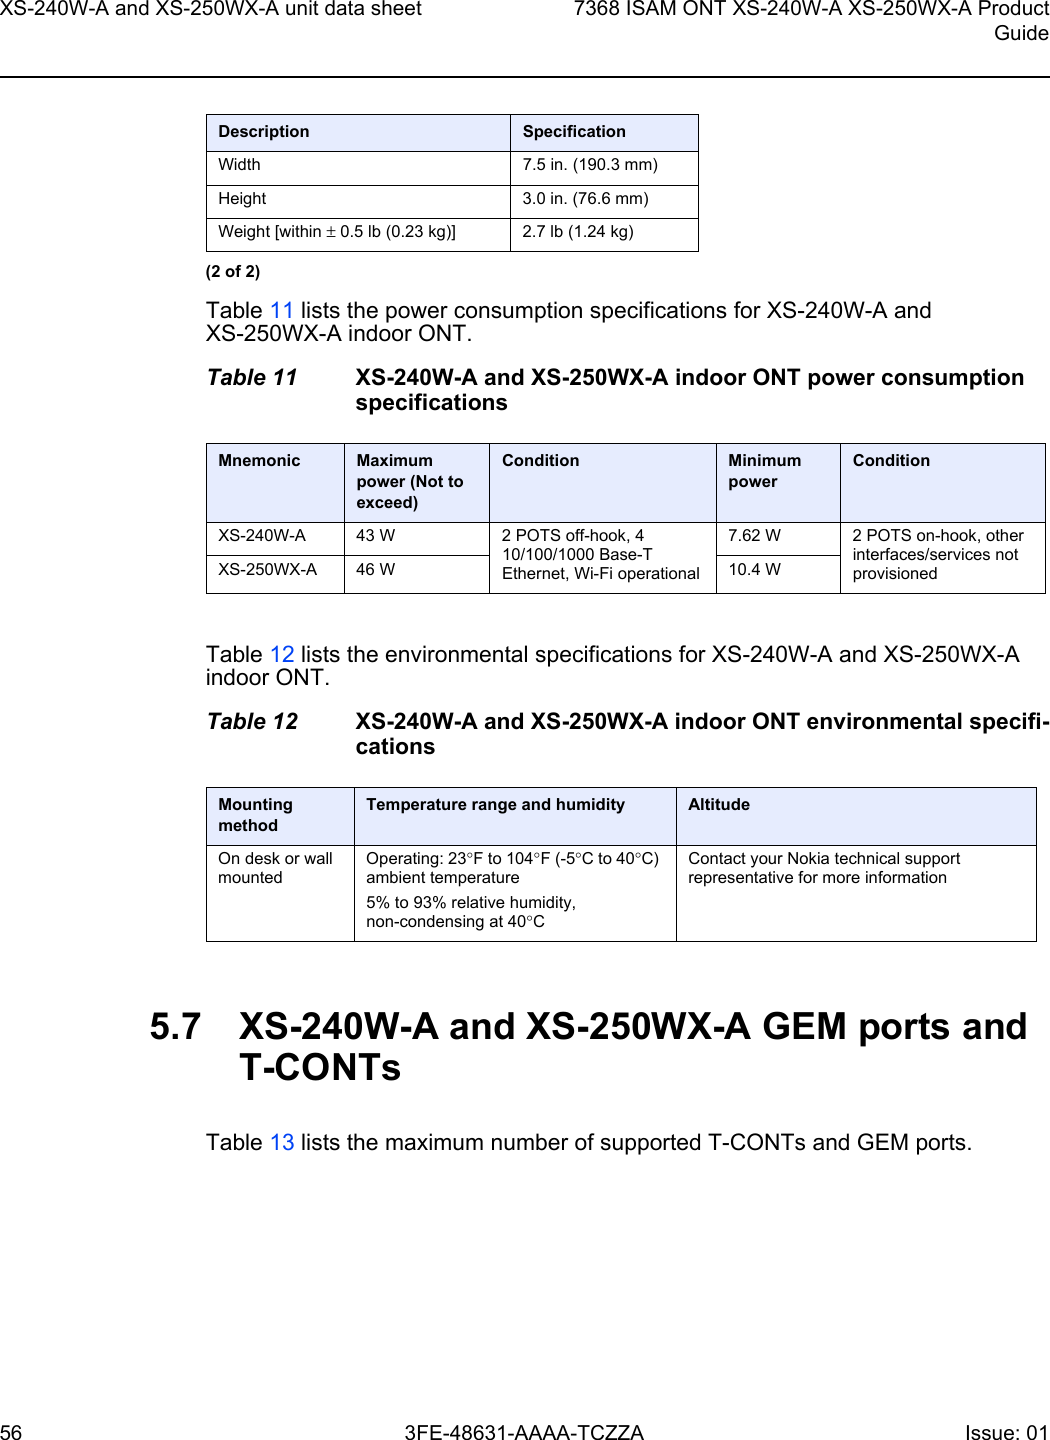 XS-240W-A and XS-250WX-A unit data sheet567368 ISAM ONT XS-240W-A XS-250WX-A ProductGuide3FE-48631-AAAA-TCZZA Issue: 01 Table 11 lists the power consumption specifications for XS-240W-A and XS-250WX-A indoor ONT.Table 11 XS-240W-A and XS-250WX-A indoor ONT power consumption specificationsTable 12 lists the environmental specifications for XS-240W-A and XS-250WX-A indoor ONT.Table 12 XS-240W-A and XS-250WX-A indoor ONT environmental specifi-cations5.7 XS-240W-A and XS-250WX-A GEM ports and T-CONTsTable 13 lists the maximum number of supported T-CONTs and GEM ports. Width 7.5 in. (190.3 mm)Height 3.0 in. (76.6 mm)Weight [within ± 0.5 lb (0.23 kg)] 2.7 lb (1.24 kg)Mnemonic Maximum power (Not to exceed)Condition Minimum powerConditionXS-240W-A 43 W 2 POTS off-hook, 4 10/100/1000 Base-T Ethernet, Wi-Fi operational7.62 W 2 POTS on-hook, other interfaces/services not provisionedXS-250WX-A 46 W 10.4 WMounting methodTemperature range and humidity AltitudeOn desk or wall mountedOperating: 23°F to 104°F (-5°C to 40°C) ambient temperature5% to 93% relative humidity, non-condensing at 40°CContact your Nokia technical support representative for more informationDescription Specification(2 of 2)